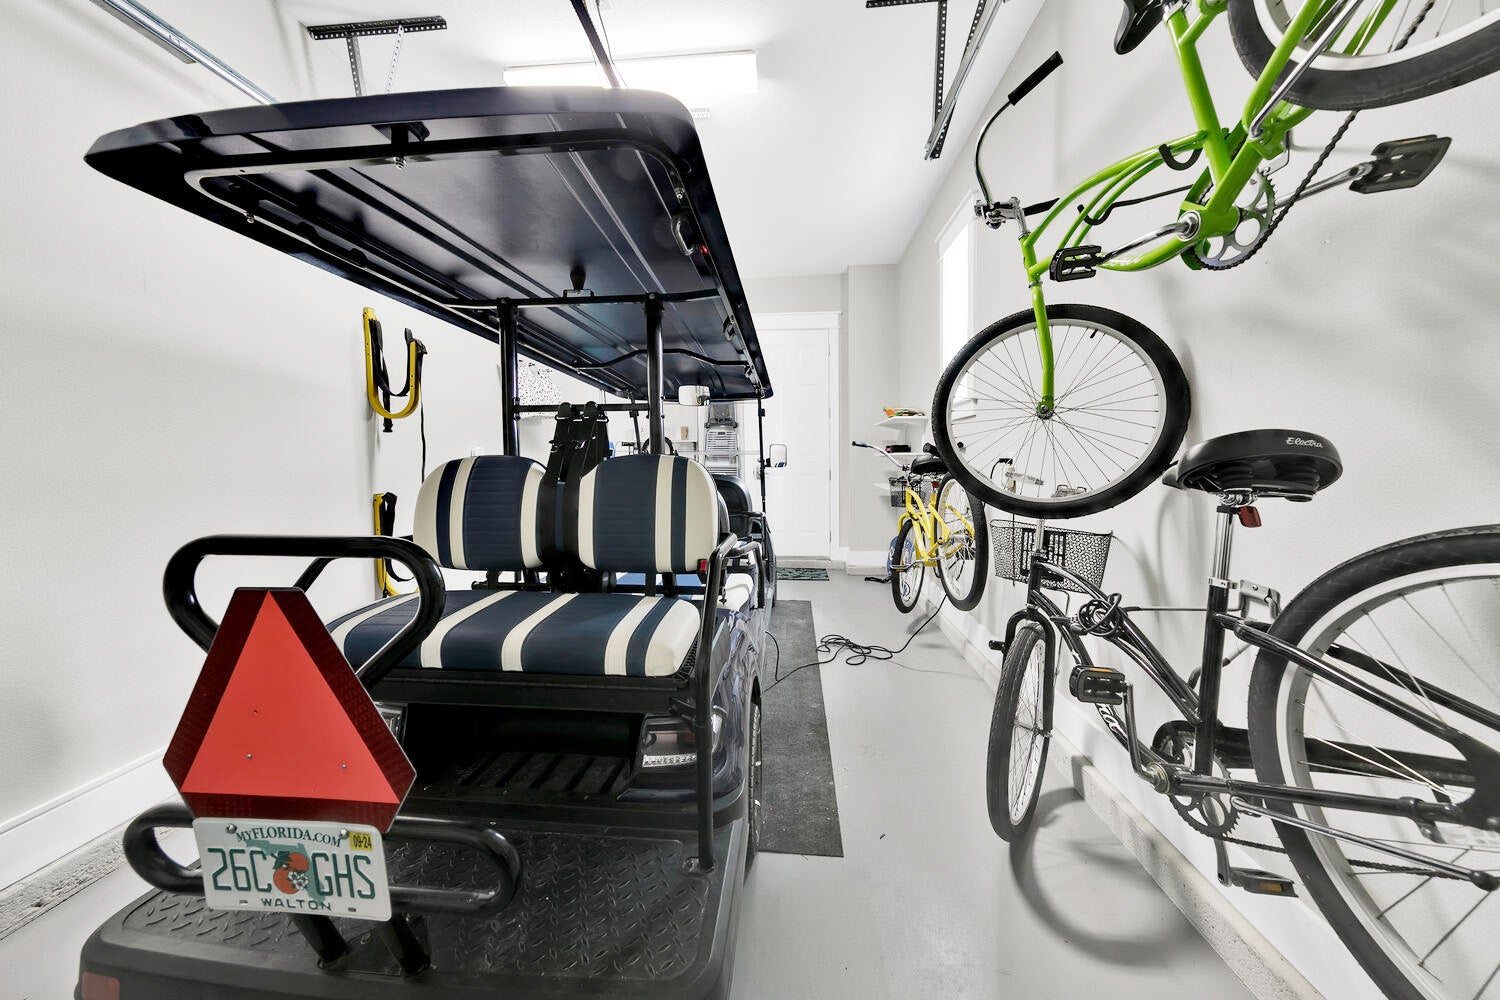 Golf cart and bikes